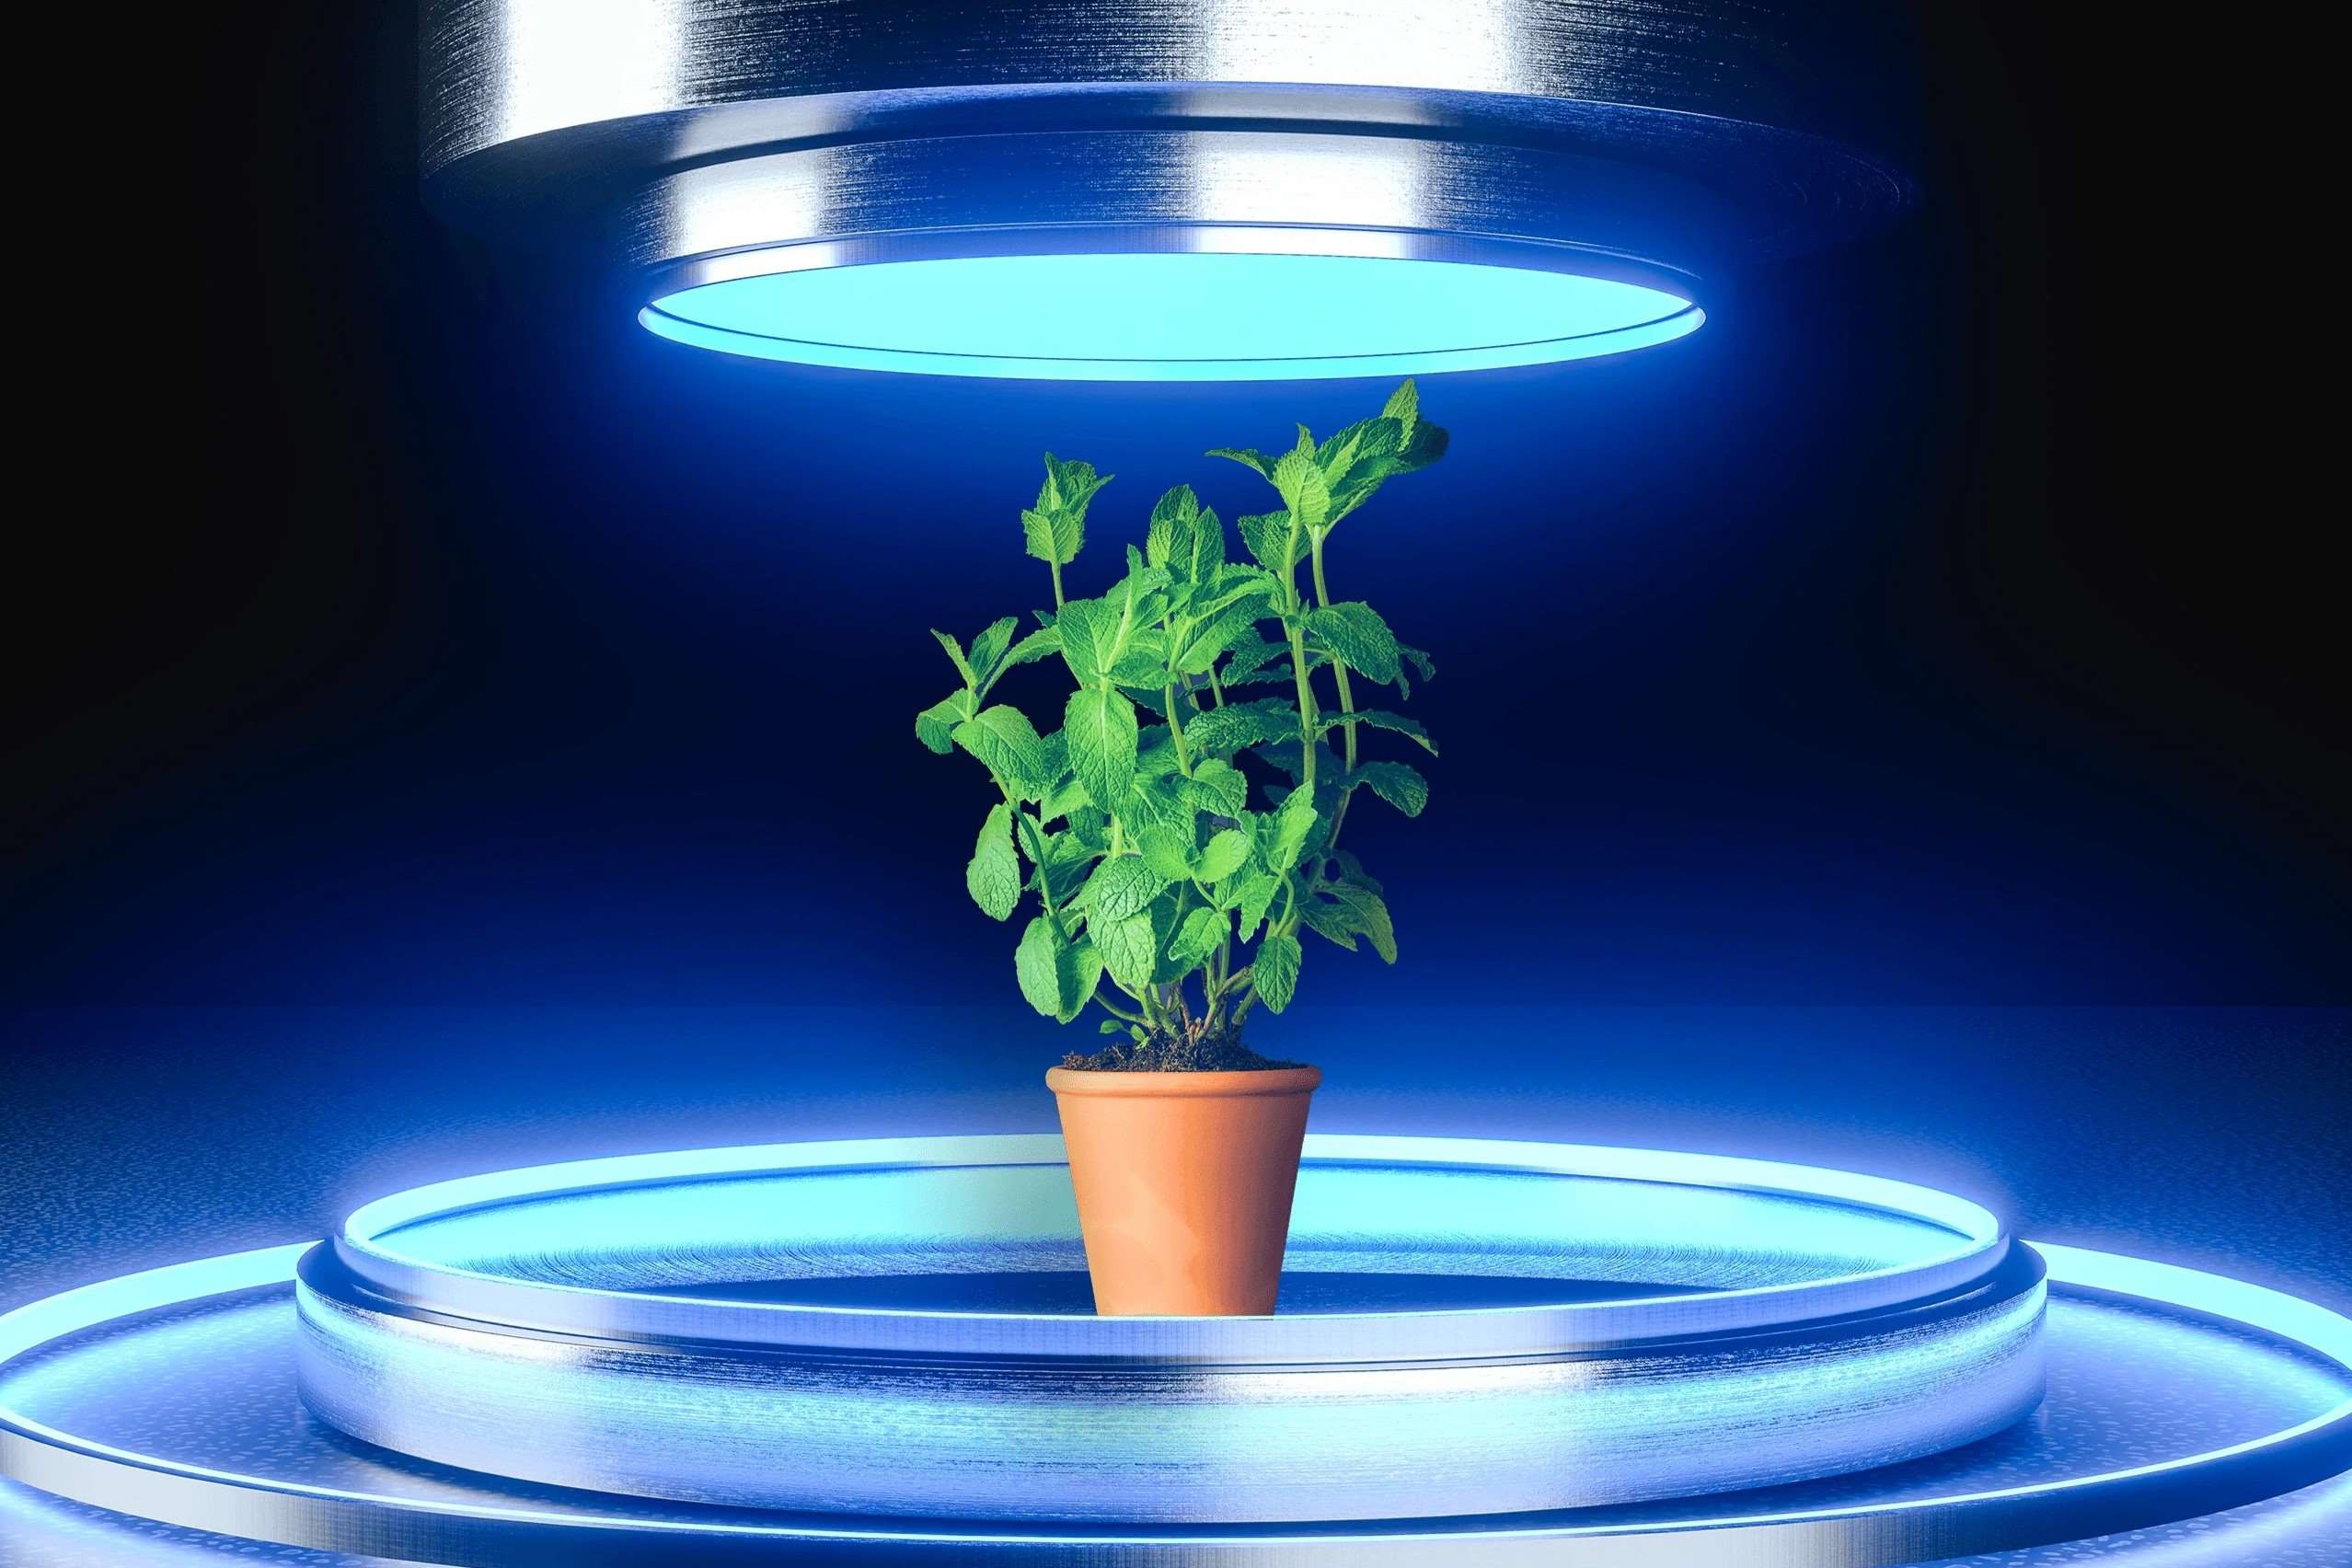 plant-physiology-understanding-why-plants-absorb-blue-light